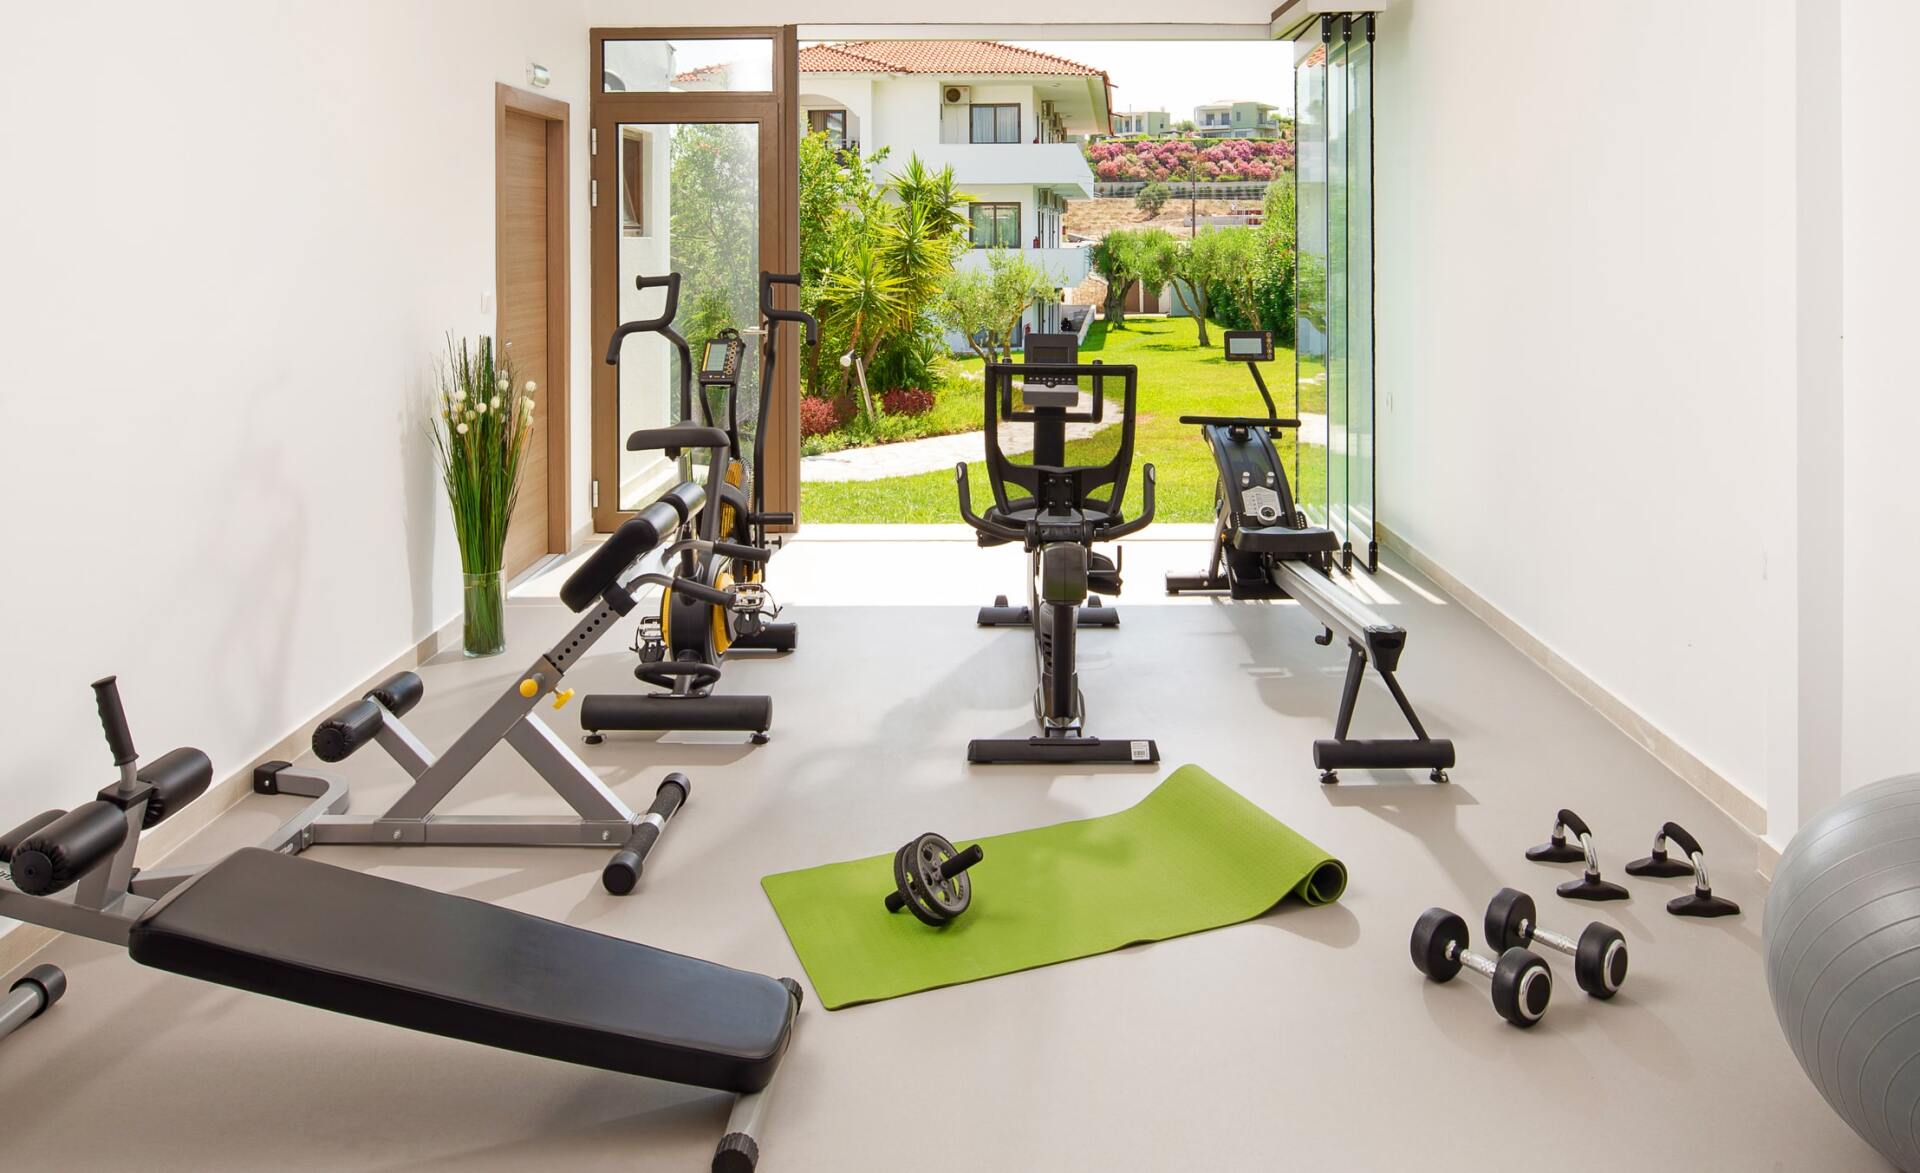 home gym addition with windows by NanaWall company. picture taken in  a home in Saratoga CA